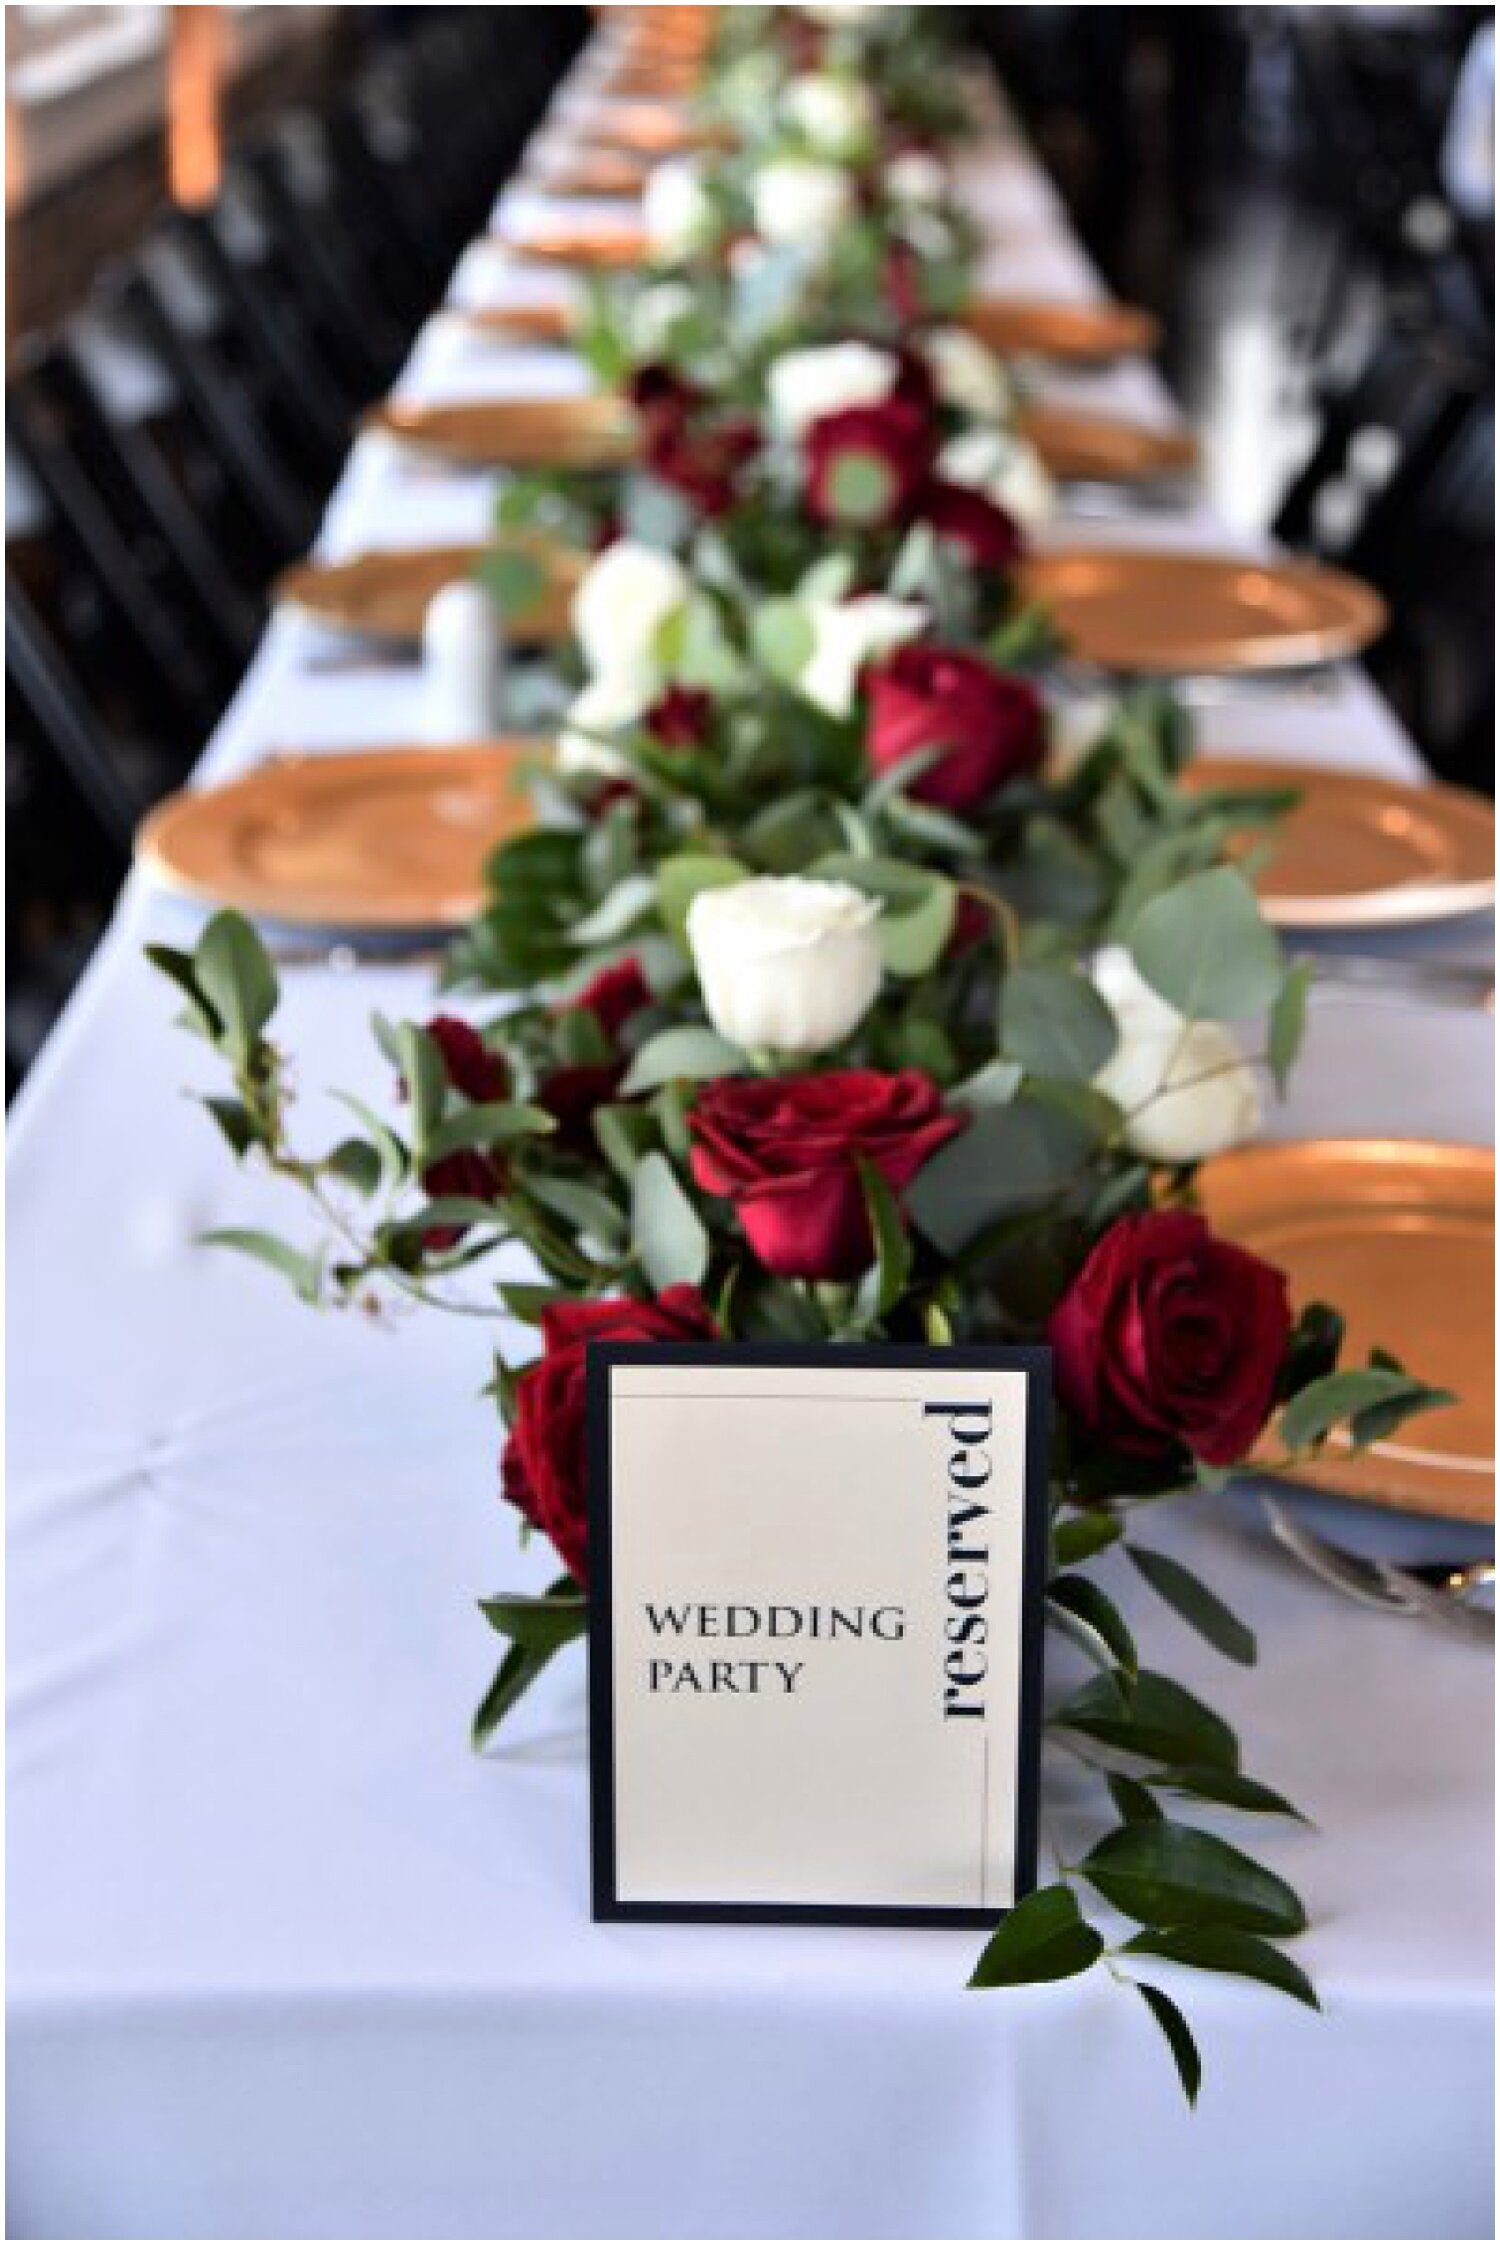  wedding party table  